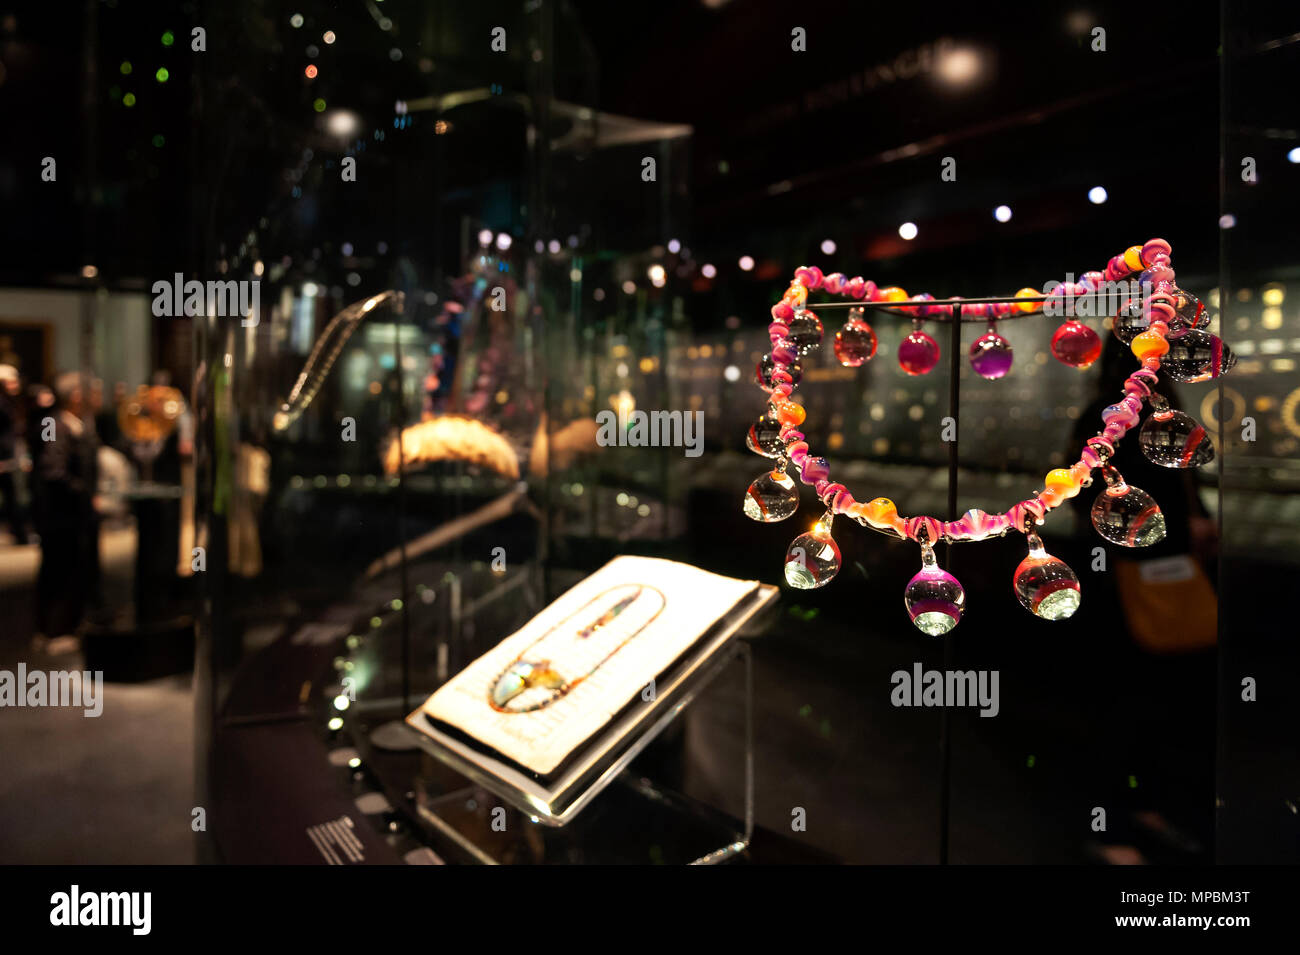 London, UK - April 2018: jewellery exhibition at The William and